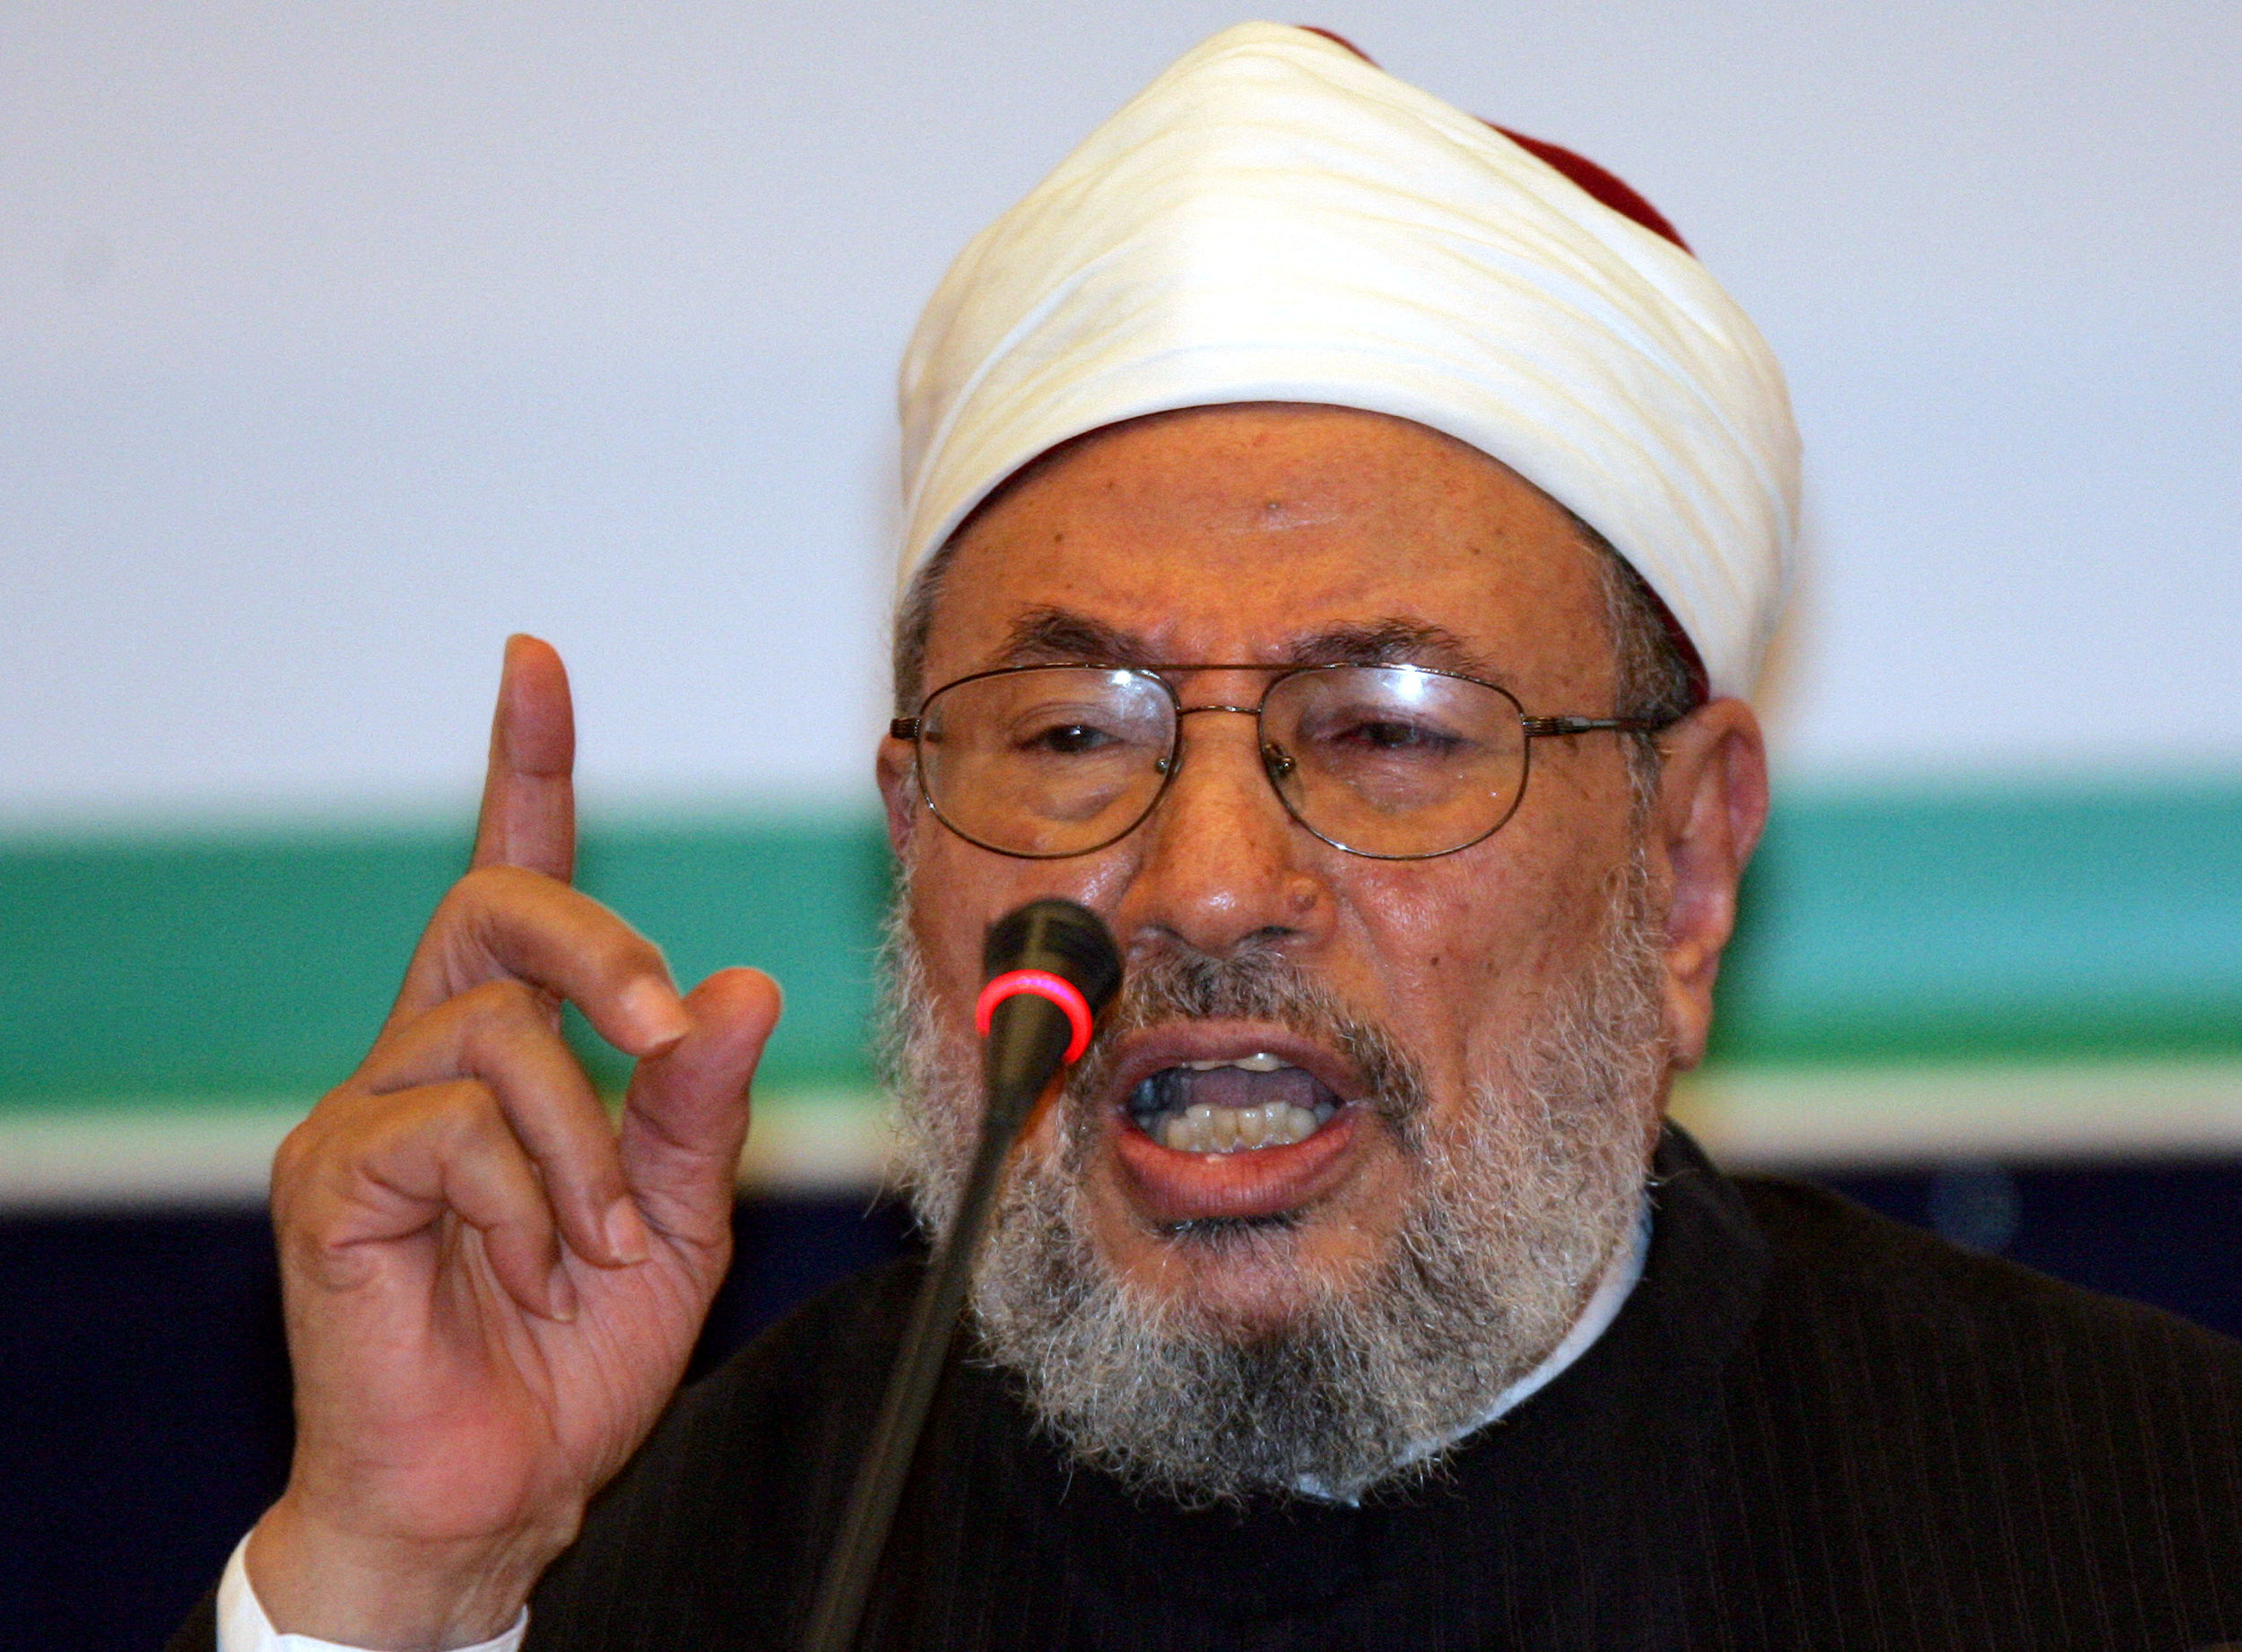 Qatar's influential cleric Al-Qaradawi attends opening session of conference in Doha